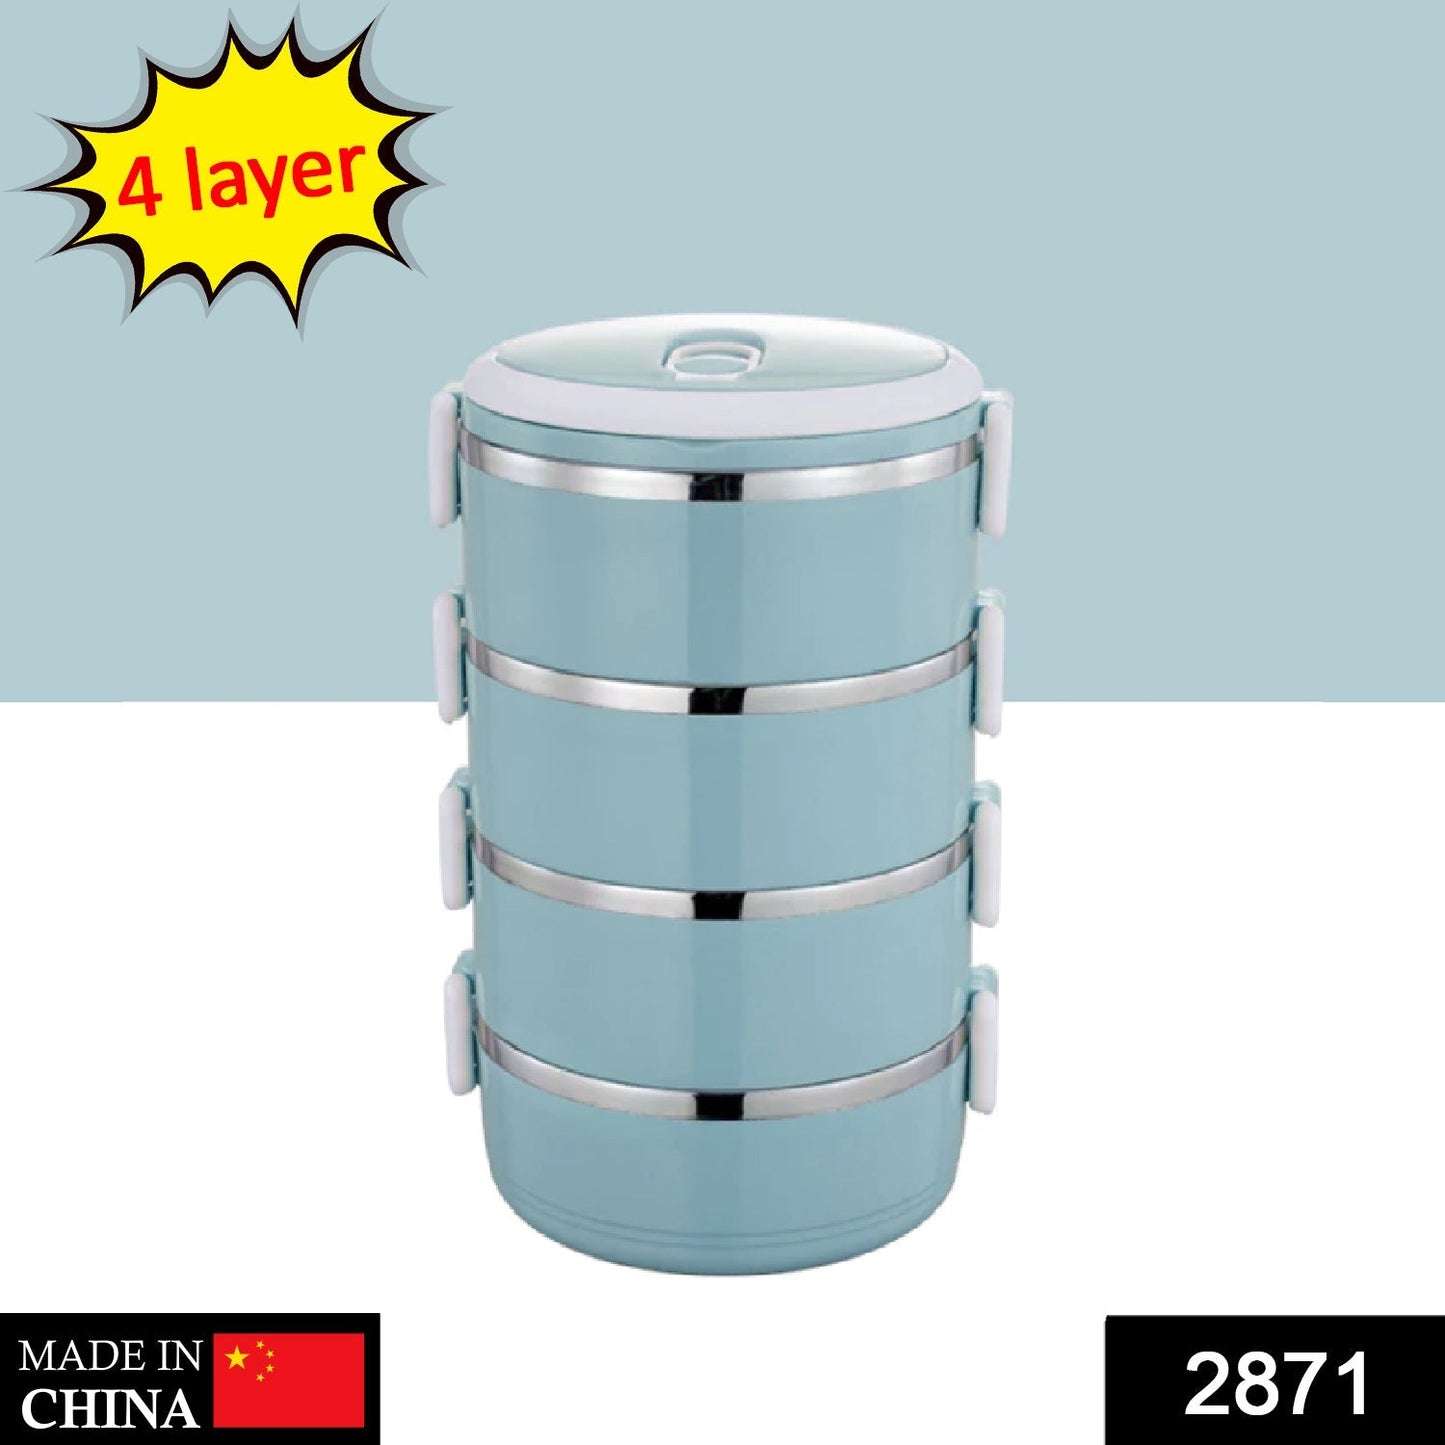 2871 Multi Layer Stainless Steel Hot Lunch Box (4 Layer) DeoDap